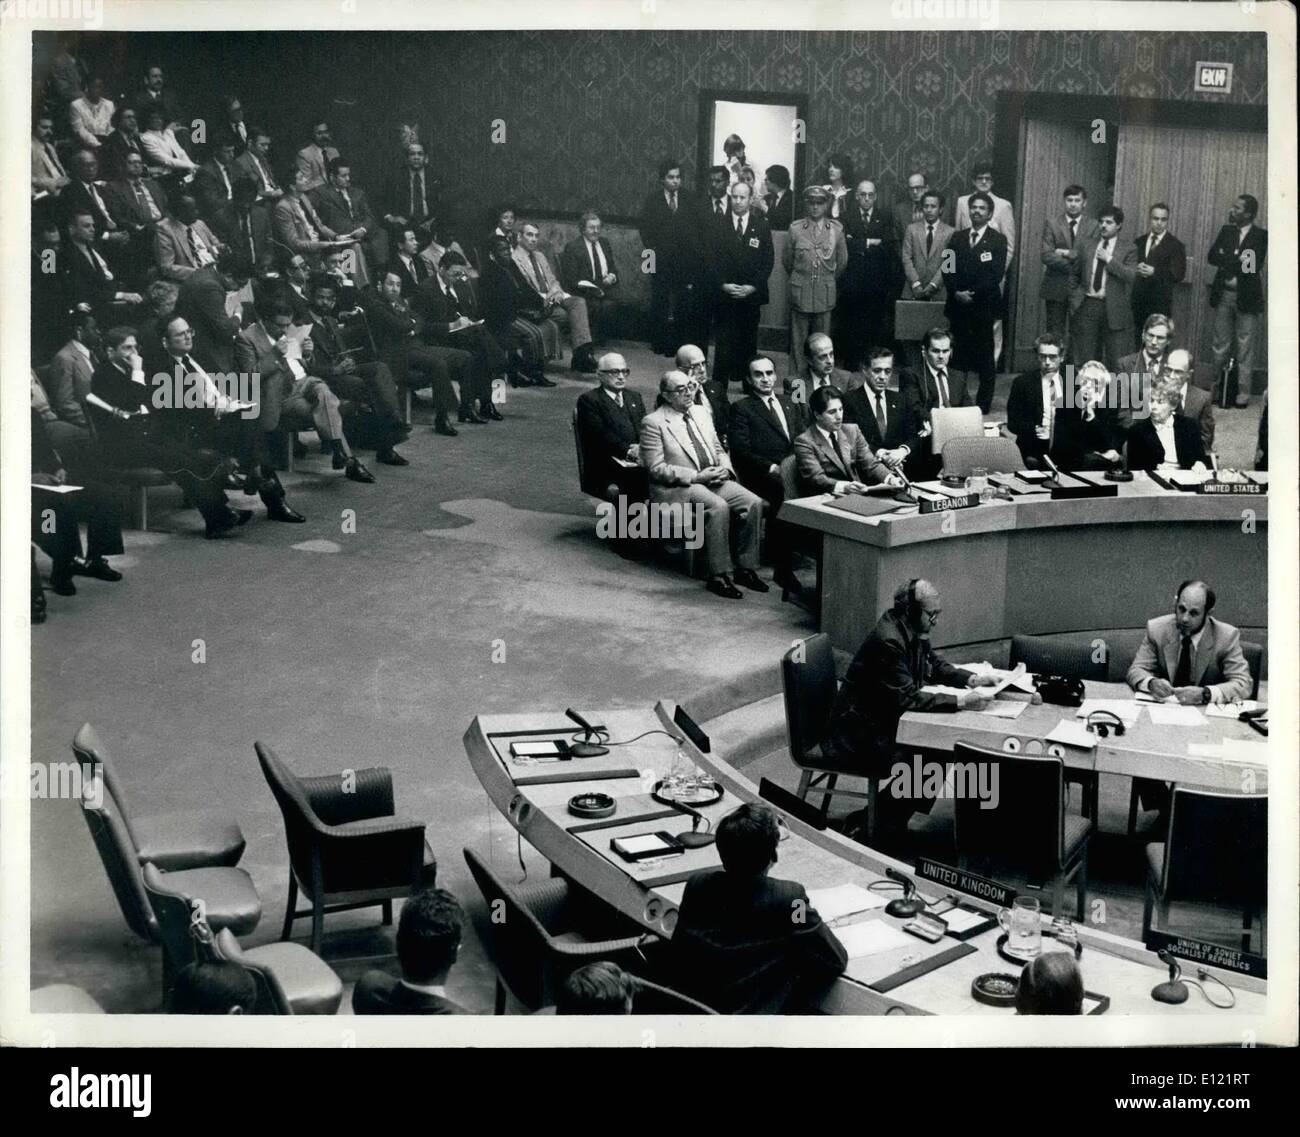 Oct. 10, 1982 - THE UNITED NATIONS, NEW YORK CITY THE NEWLY ELECTED PRESIDENT OF LEBANON, SHEIKH AMIN TRAVEL, SPOKE BEFORE THE SECURITY COUNCIL MEETING ON THE EXTENSION OF UNITED NOTIONS FORCES IN unarm. ,HEIKH GEHAYEL REQUESTED A THREE FOYTH EXTENSION OF THE FORCES. TITER HIS SPEECH THE COLSICIL VE.T GAD EXTENDED THE FORCES FOR THE THREE MONGHS O.P.S. HR. GEVAYEL SPEEKING AT THE comm. TABLE. TO THE LEFT IN THE FIRST RON OF SPECTATOR, HIS RIGHT HAND UP TO HIS FACE IS THE ISRAELI OBASSADOR TO THE UNITED NATIONS 0,. YAHUDA ALGA Stock Photo